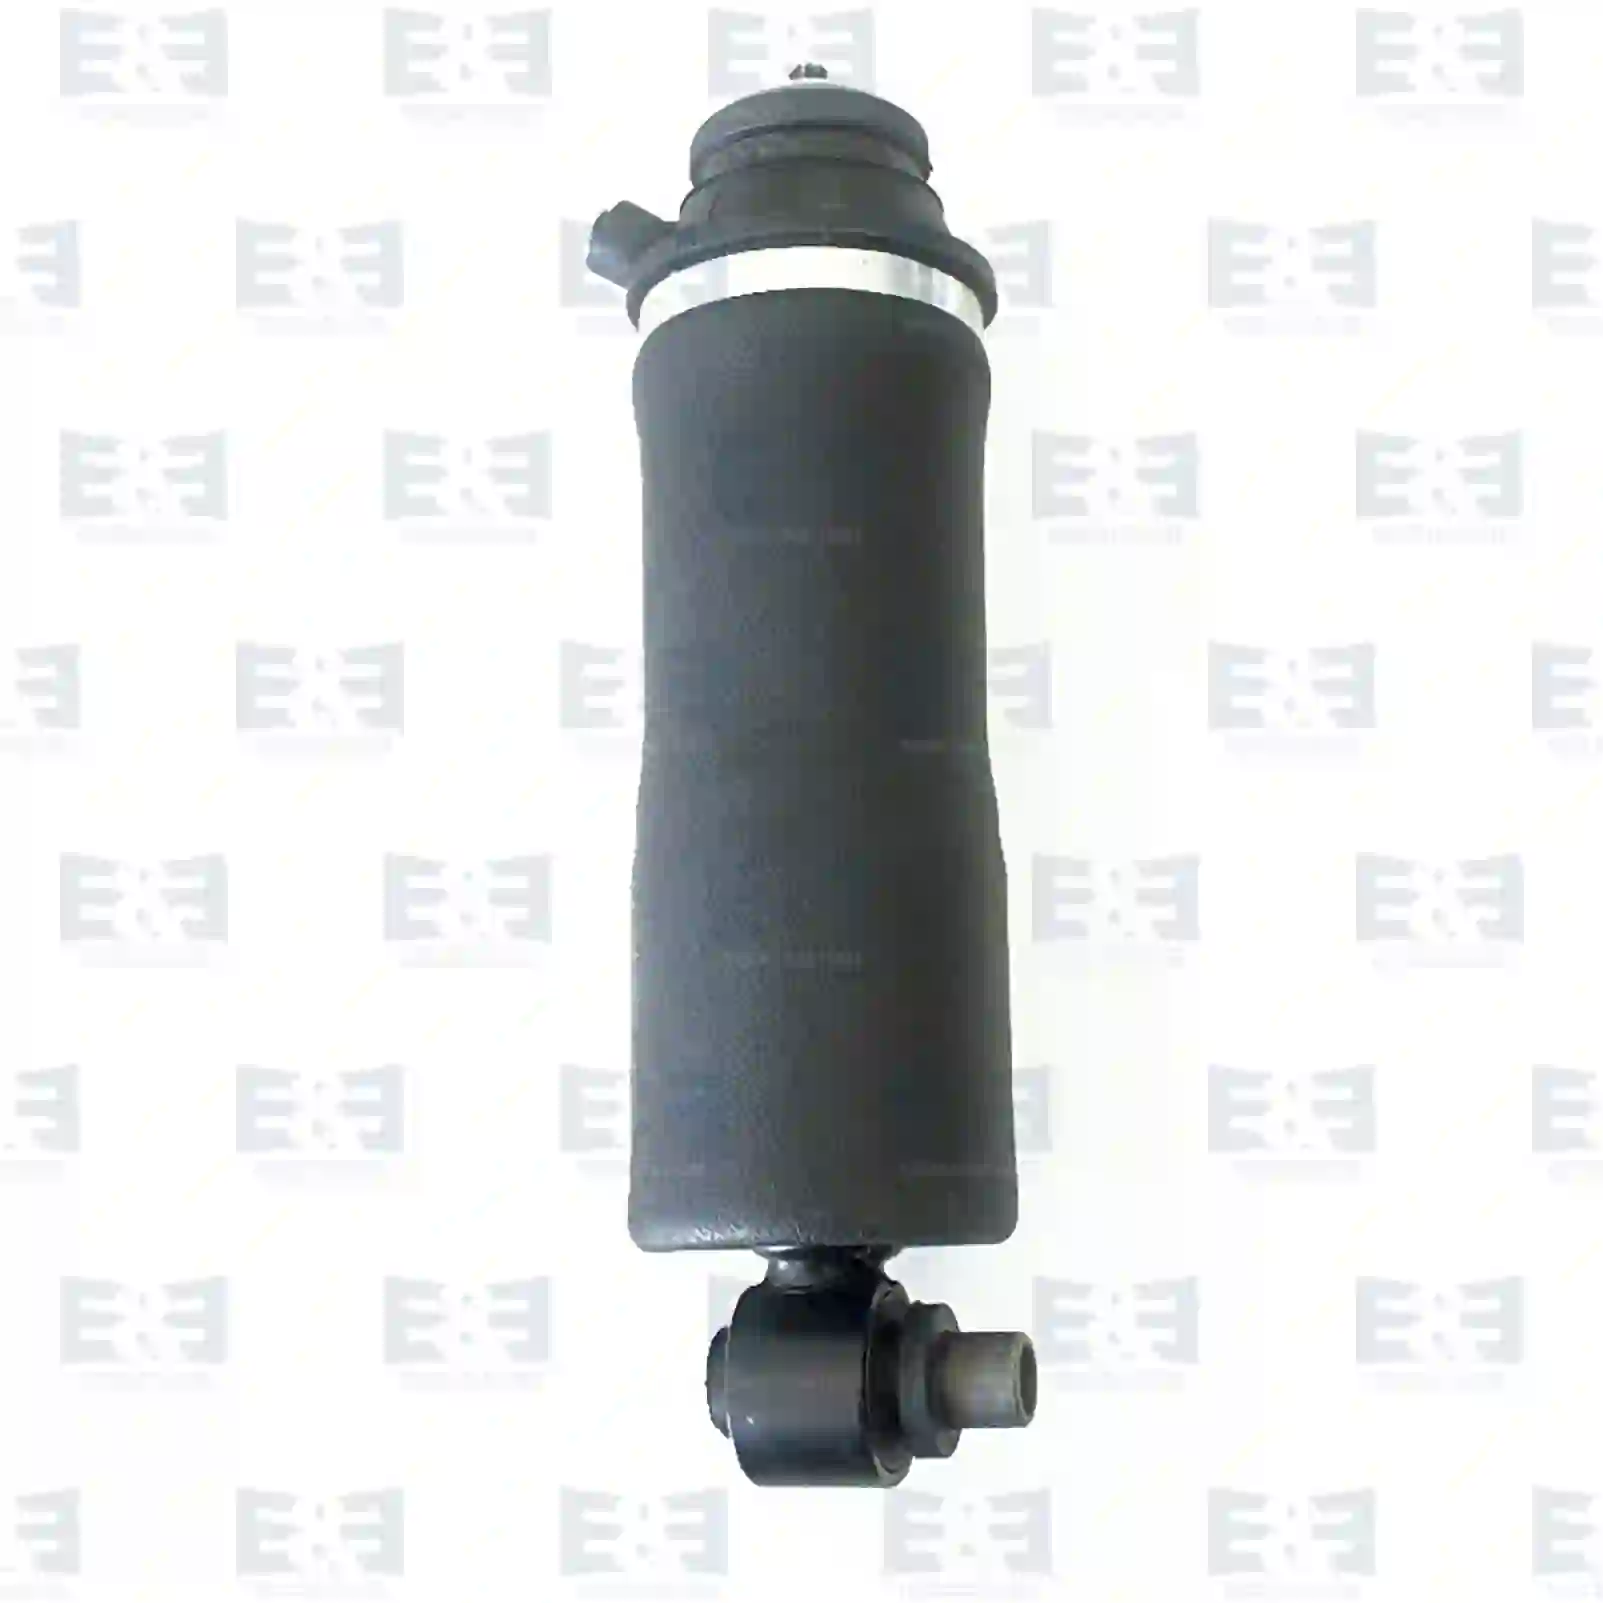 Cabin shock absorber, with air bellow, 2E2275984, 7421170696, 21430900, , , ||  2E2275984 E&E Truck Spare Parts | Truck Spare Parts, Auotomotive Spare Parts Cabin shock absorber, with air bellow, 2E2275984, 7421170696, 21430900, , , ||  2E2275984 E&E Truck Spare Parts | Truck Spare Parts, Auotomotive Spare Parts